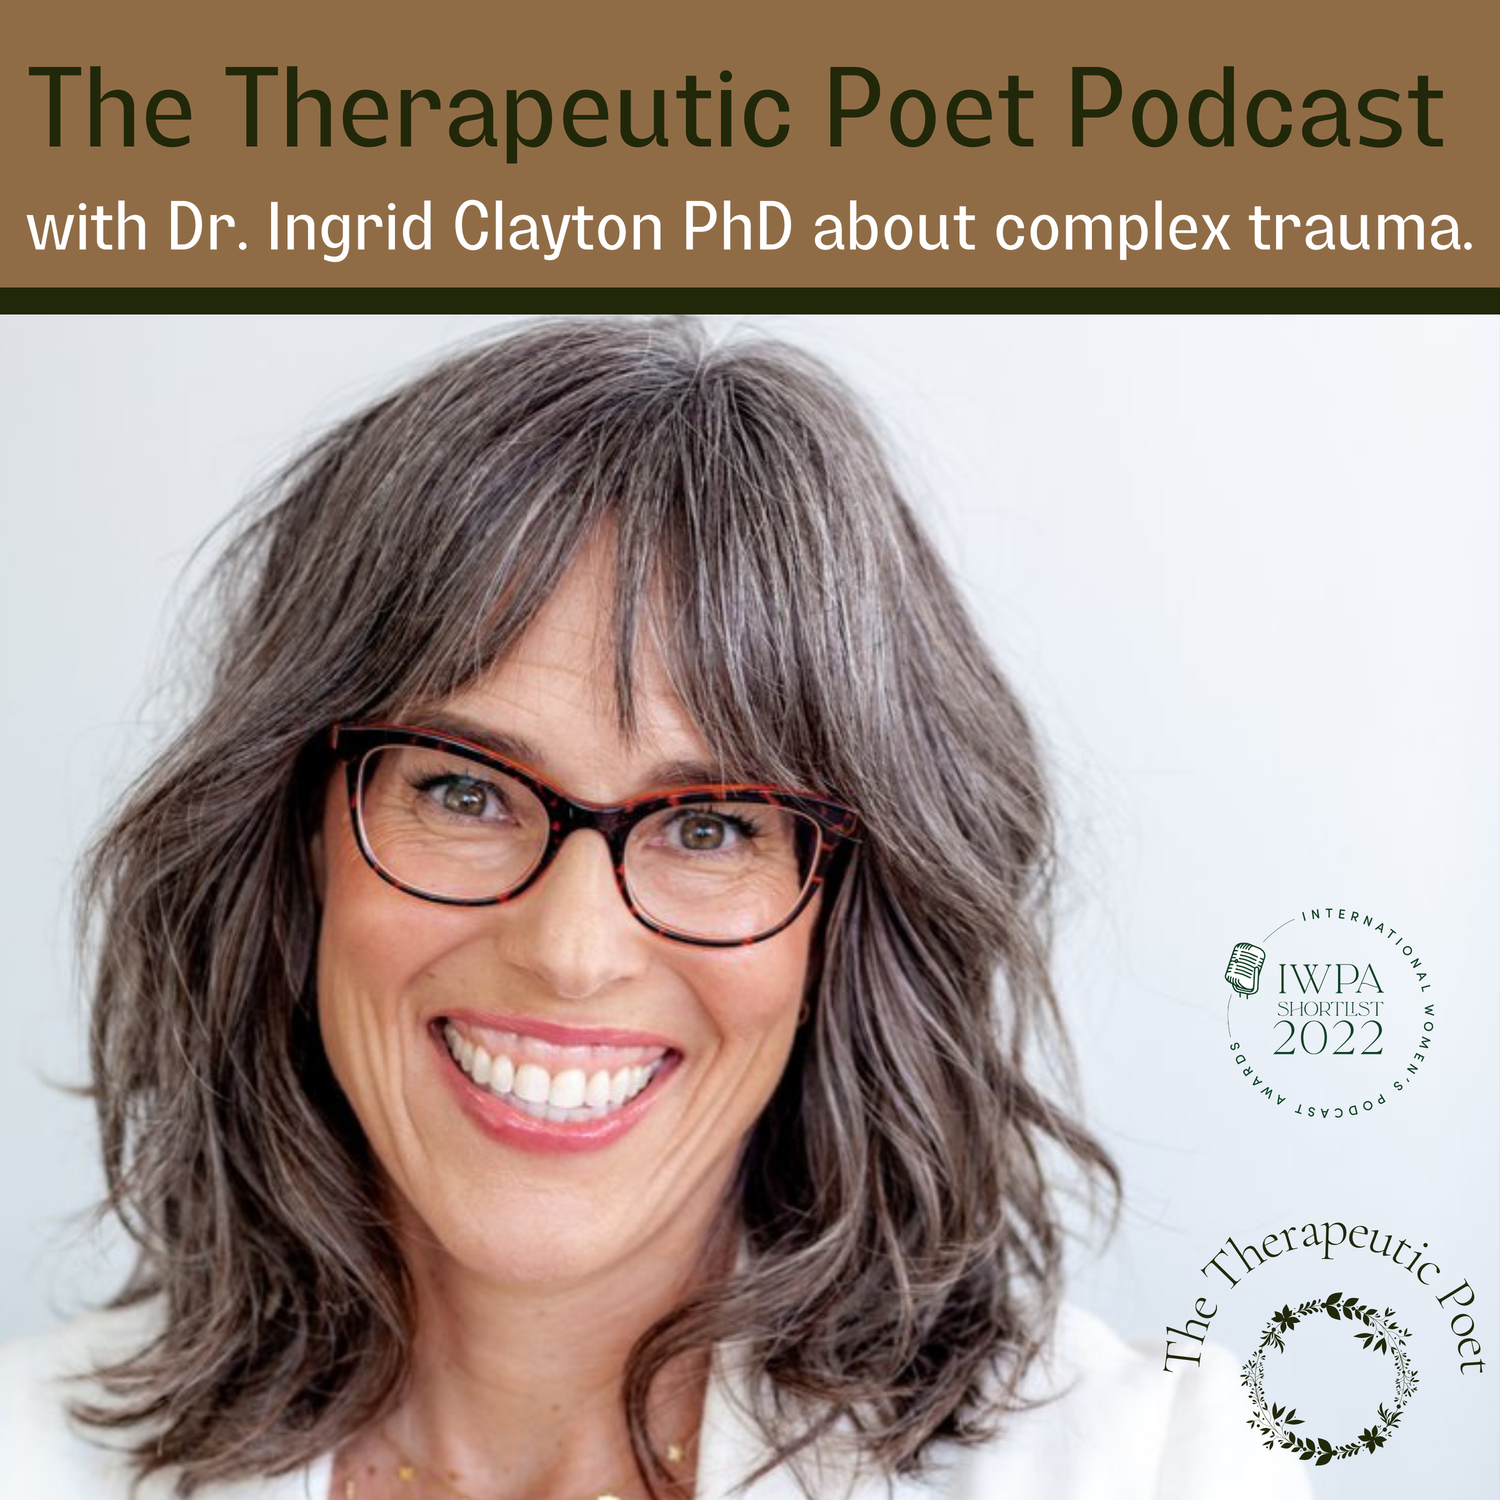 In conversation with Dr. Ingrid Clayton about complex trauma.